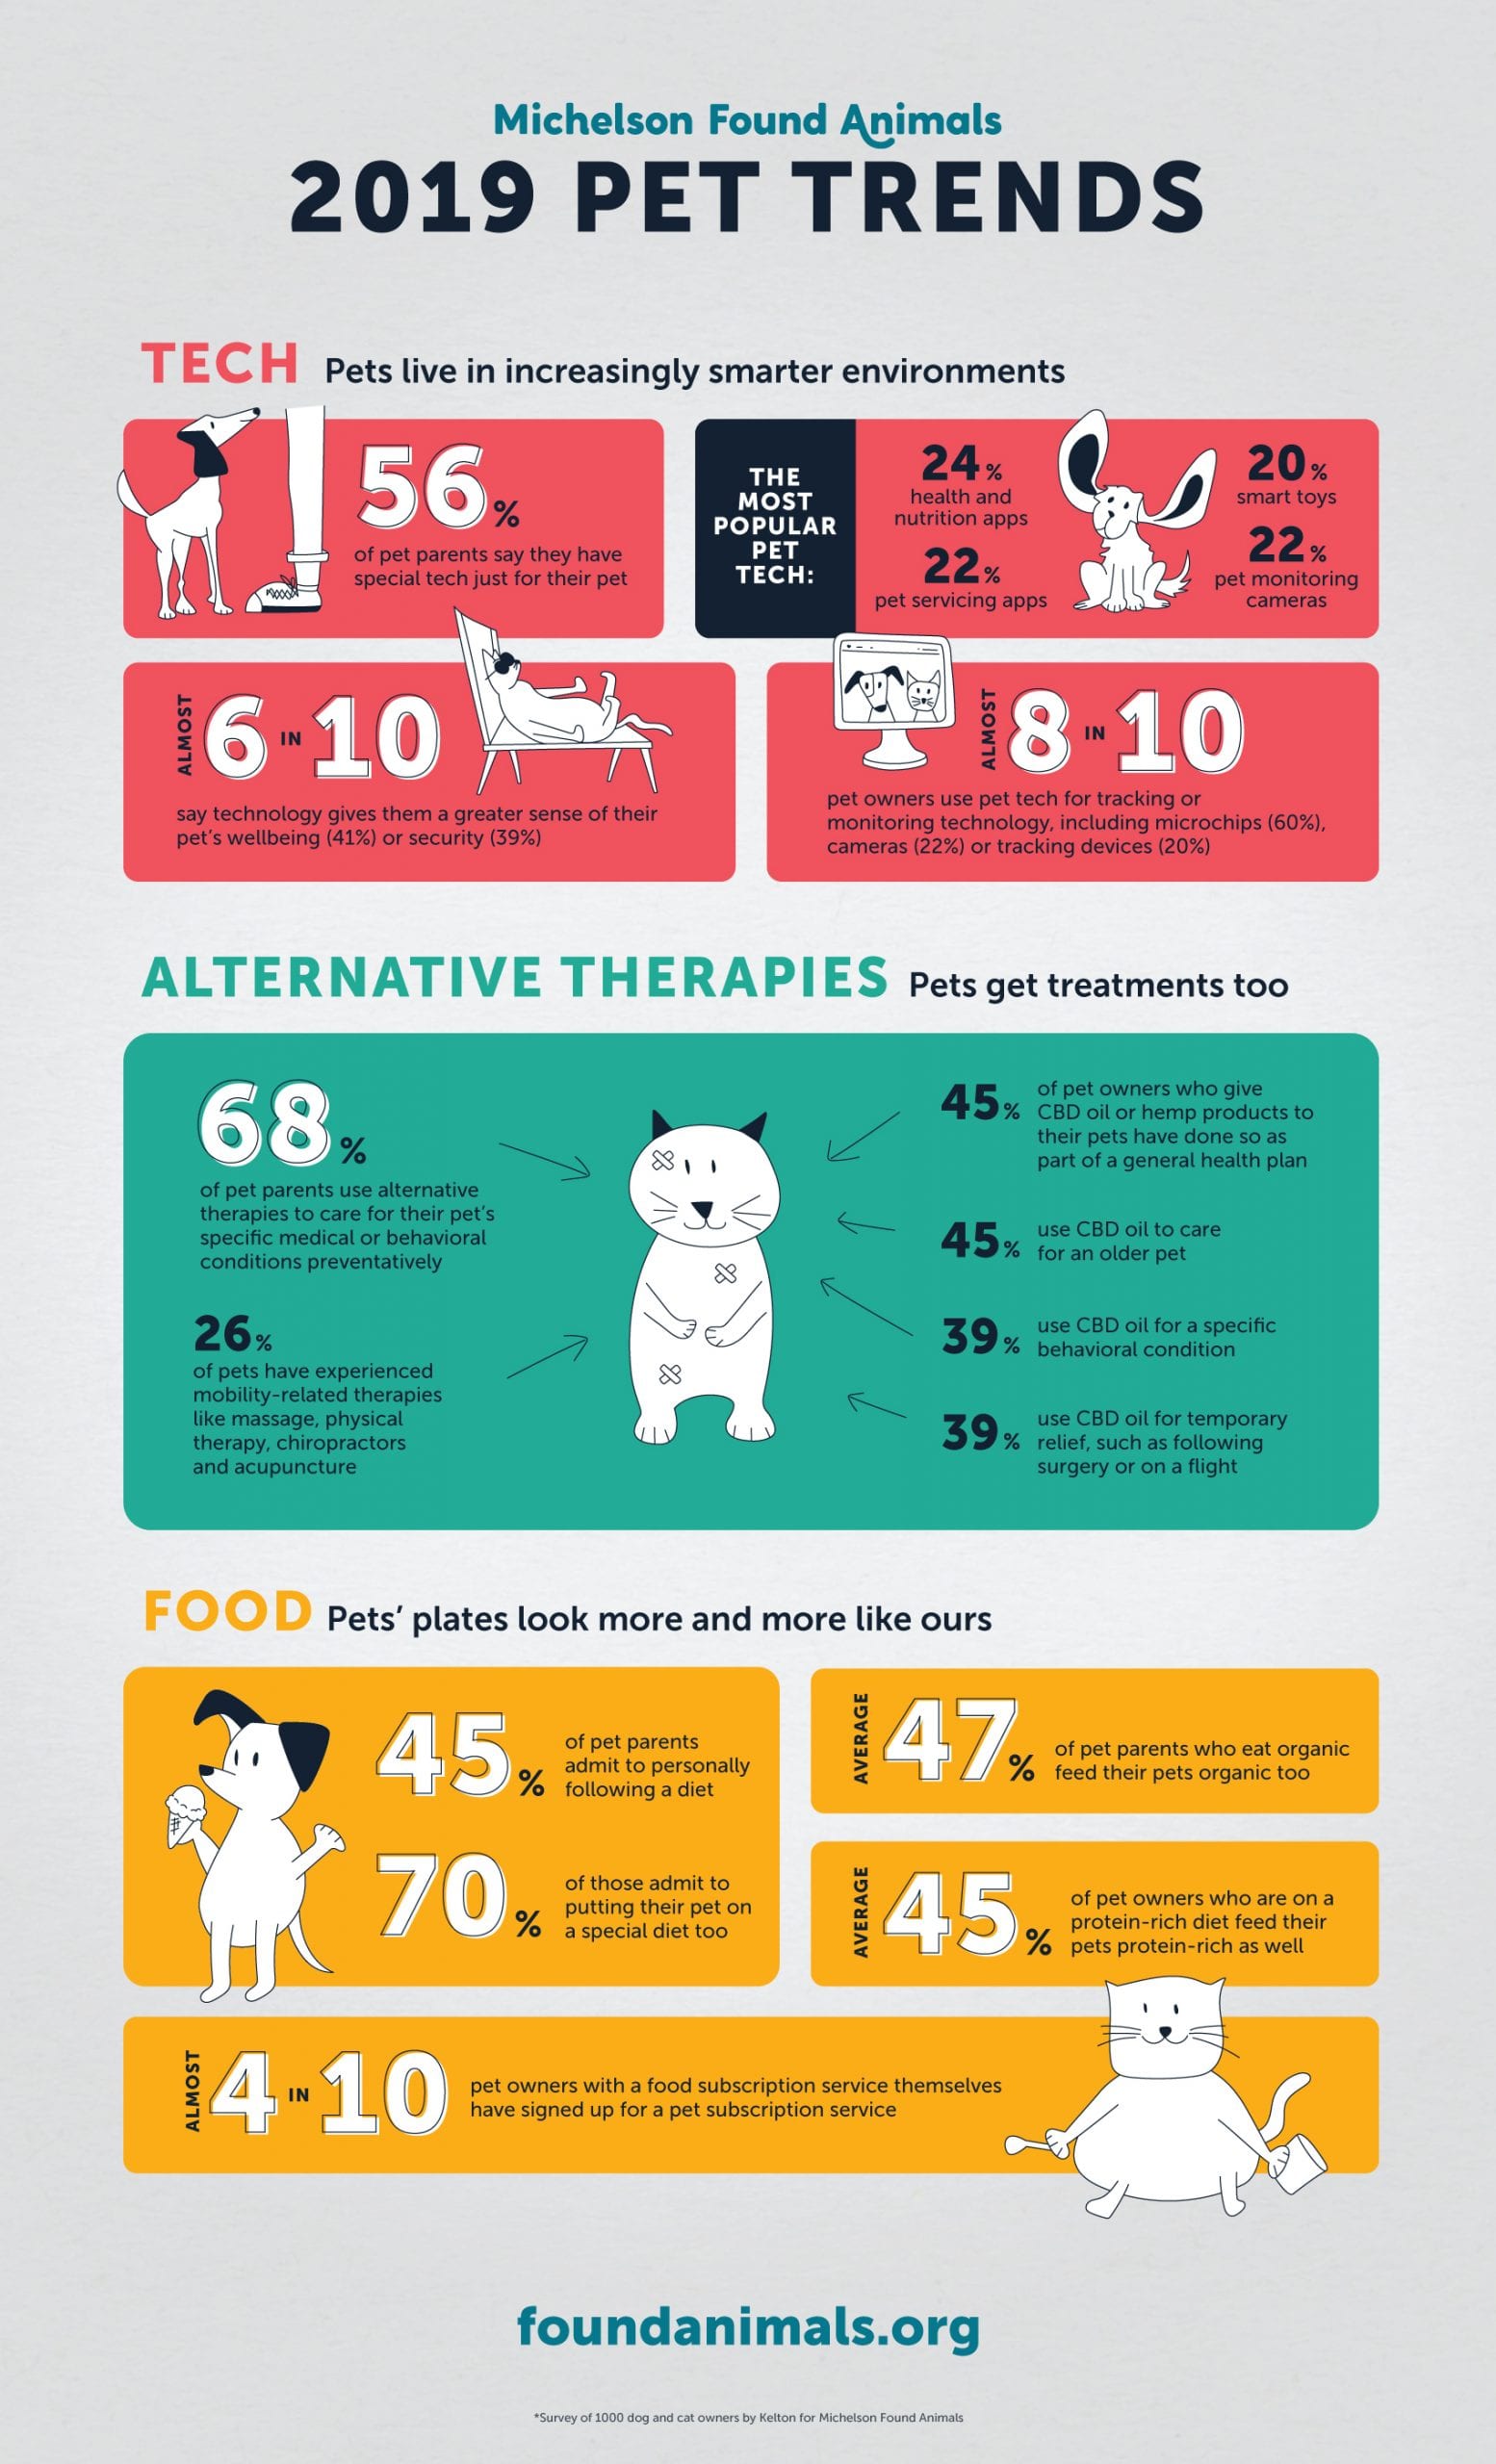 An infographic for Michelson Found Animals 2019 Pet Trends in the areas of Tech, Alternative Therapies, and Food